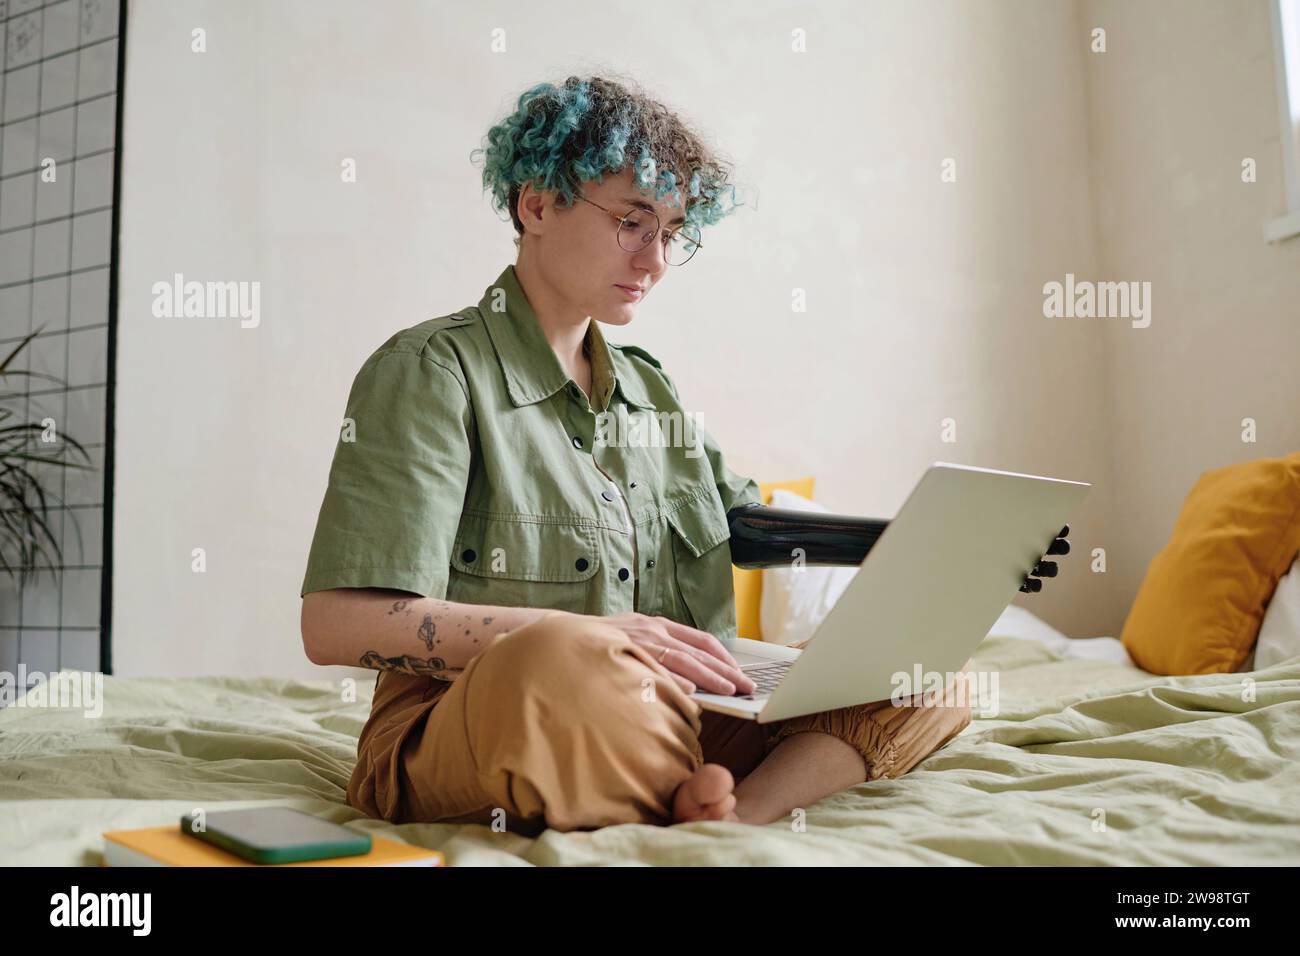 Serious young woman with prosthetic arm working from home Stock Photo